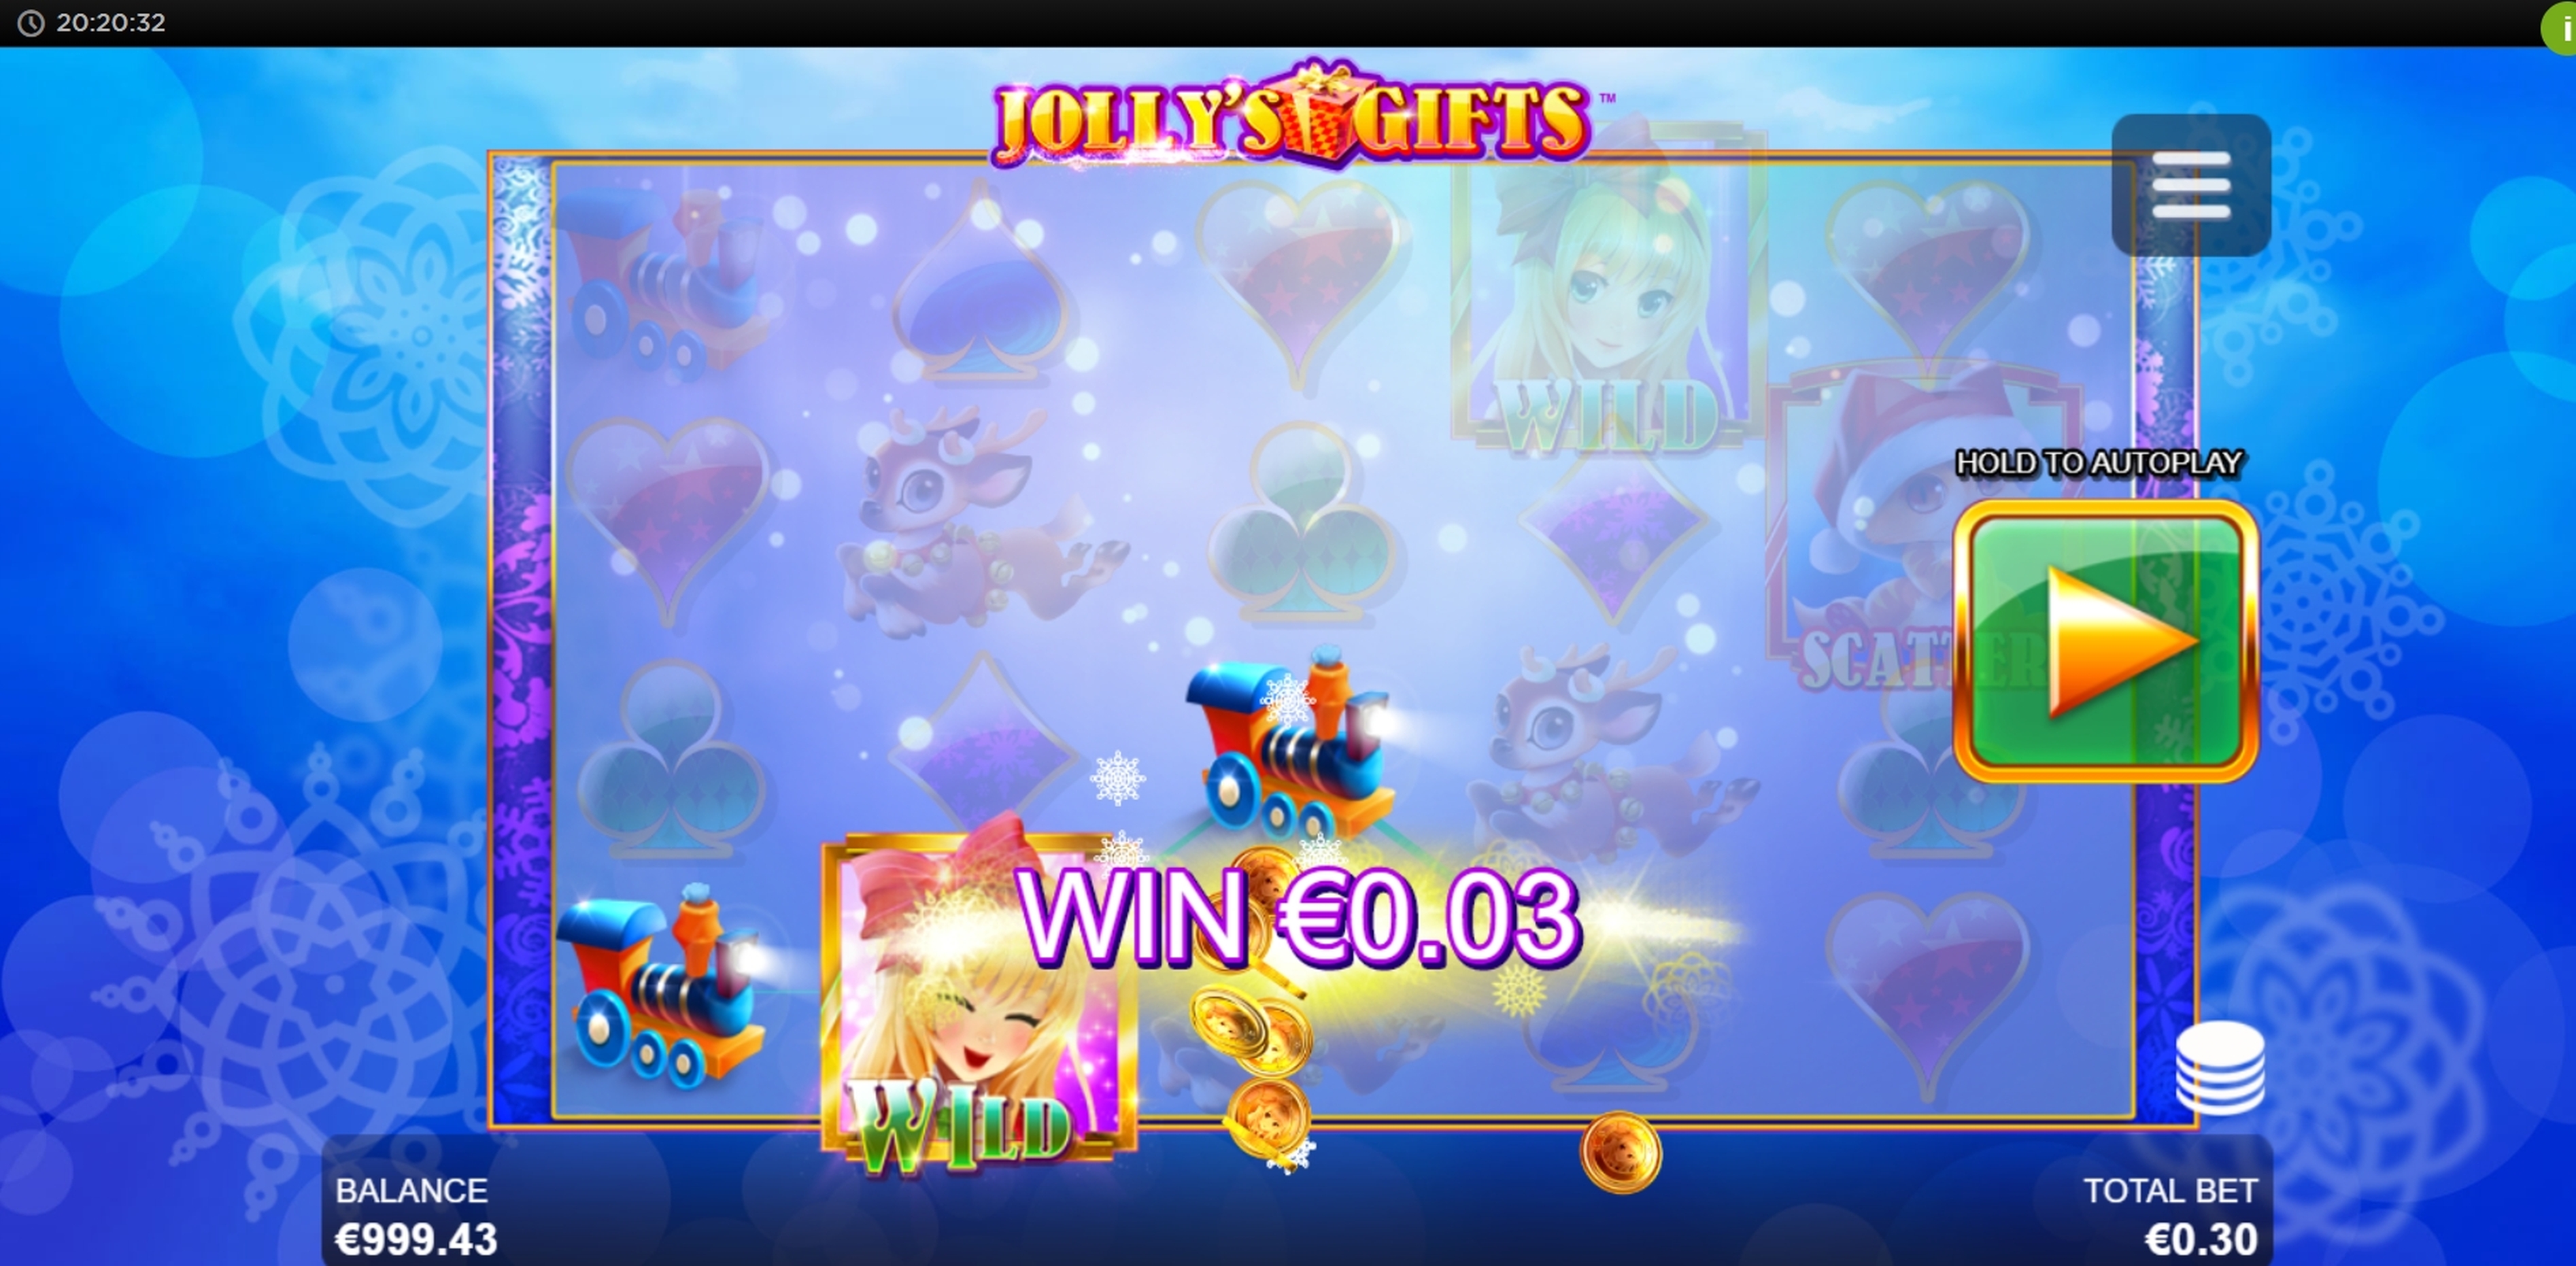 Win Money in Jolly's Gifts Free Slot Game by Side City Studios